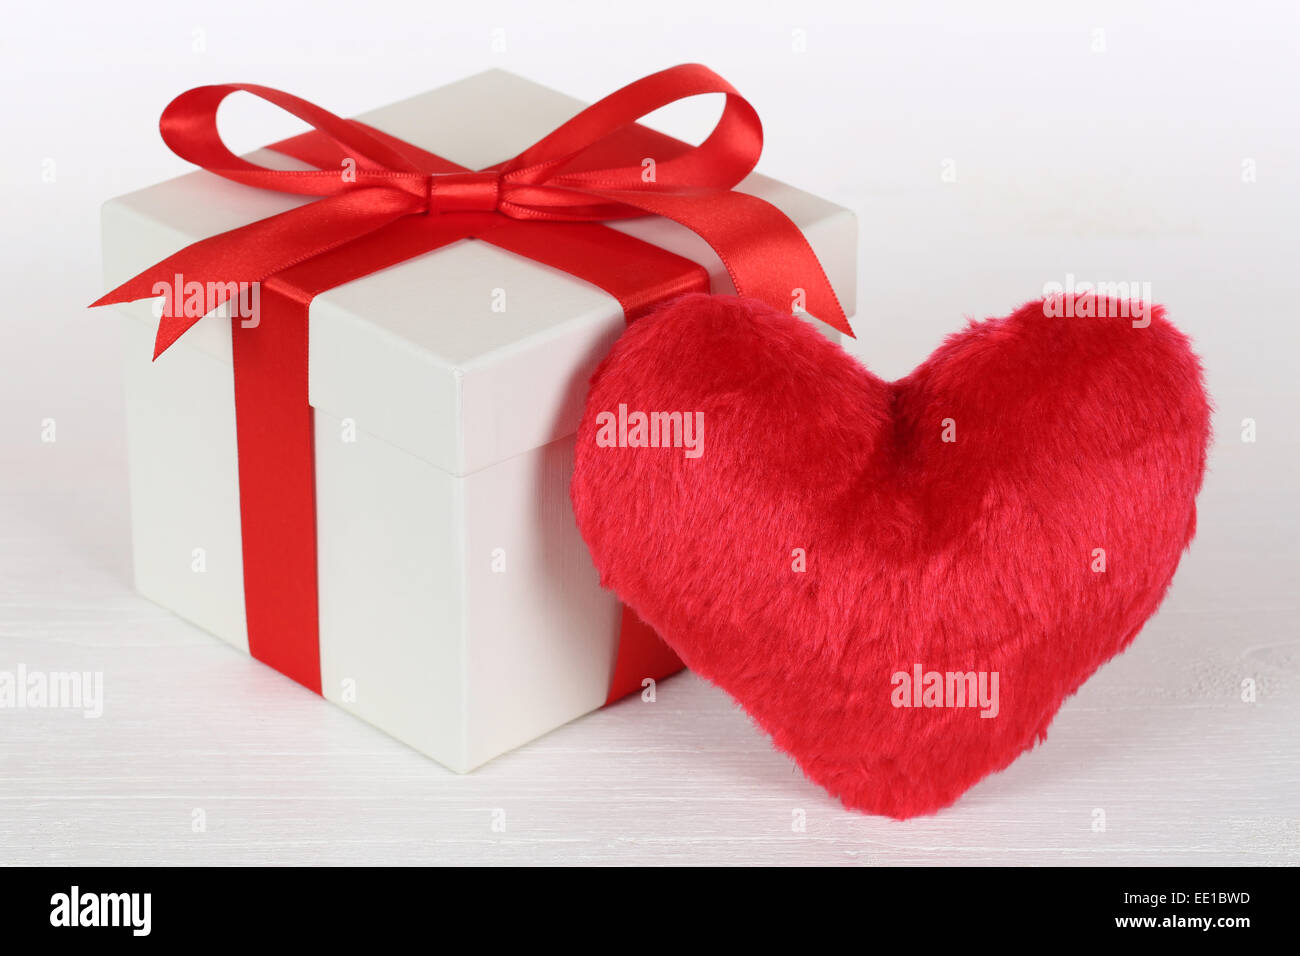 Magic For Valentine's Day, Gifts In Heart Shaped Opened Box, 50% OFF